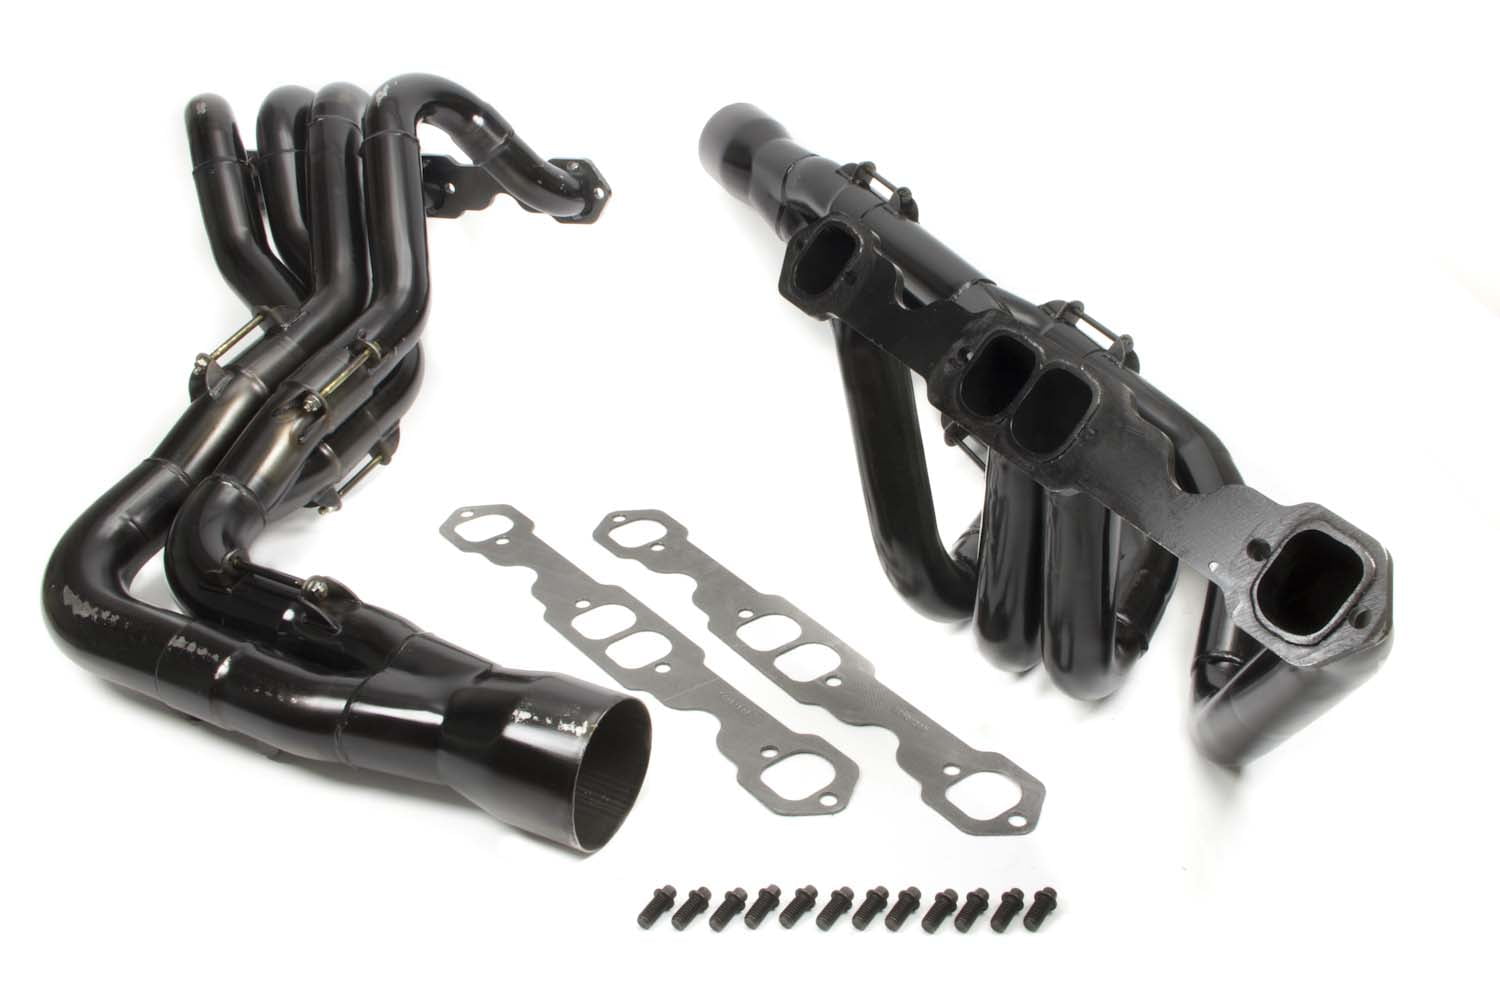 3-1/2 Collector 1-7/8 Standard Port Small Block Fits Chevy Header Kit